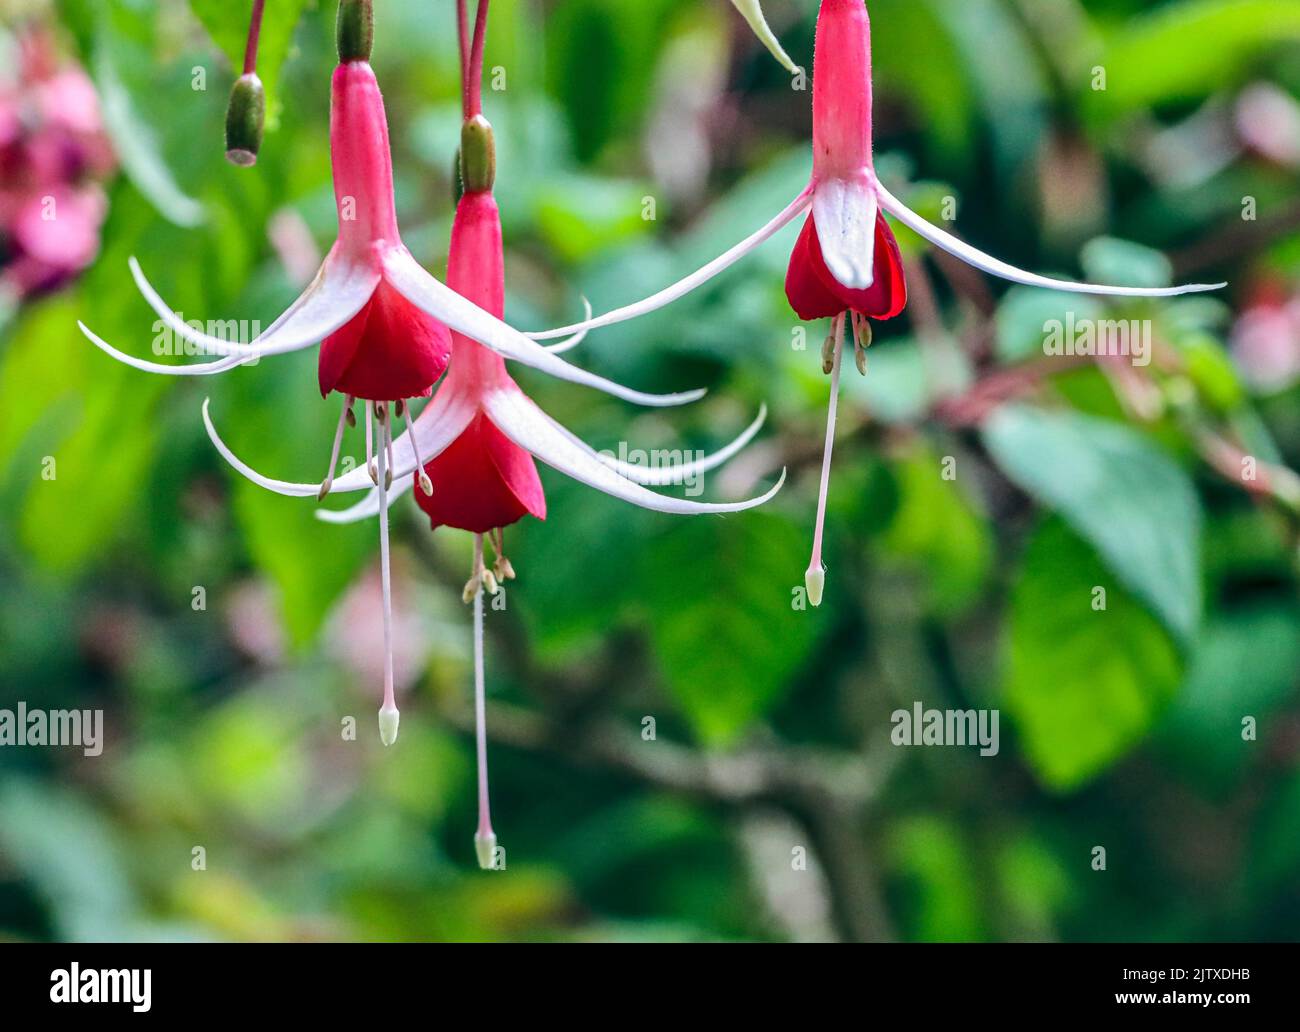 Hanging fuchsias (Onagraceae) at Butchart Gardens located in Brentwood Bay, British Columbia, Canada. Stock Photo